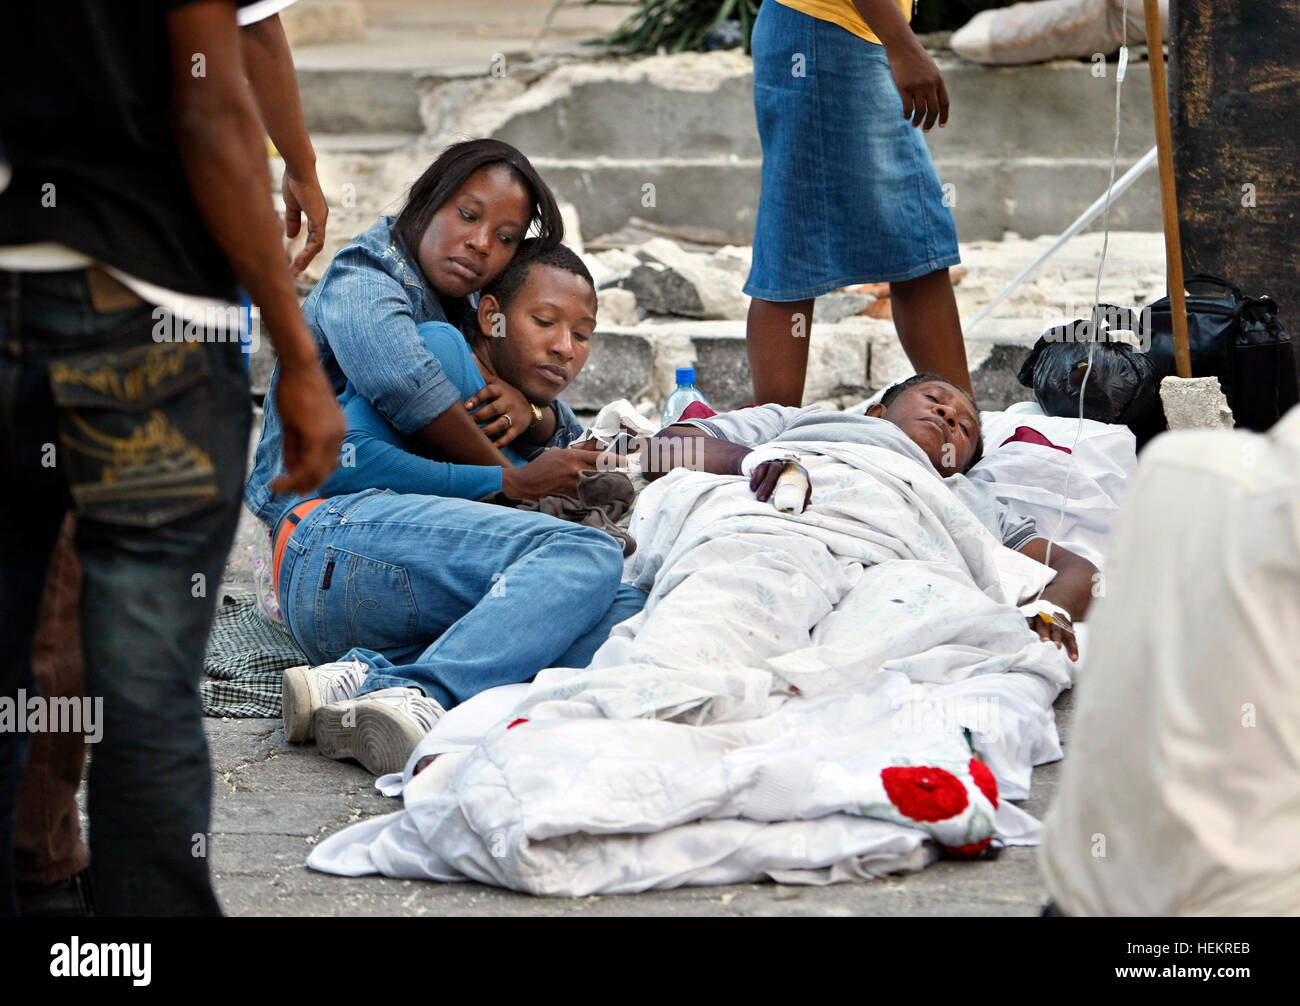 December 23, 2016 - Port-Au-Prince, Florida, U.S. - 011810 (Lannis Waters/The Palm Beach Post) PORT-AU-PRINCE, HAITI - Loved ones sit with a patient in a courtyard outside Sacre Cour Hospital in Port-au-Prince. Many patients wait there for treatment, are treated outside, and recover on the ground outdoors. (Credit Image: © Lannis Waters/The Palm Beach Post via ZUMA Wire) Stock Photo